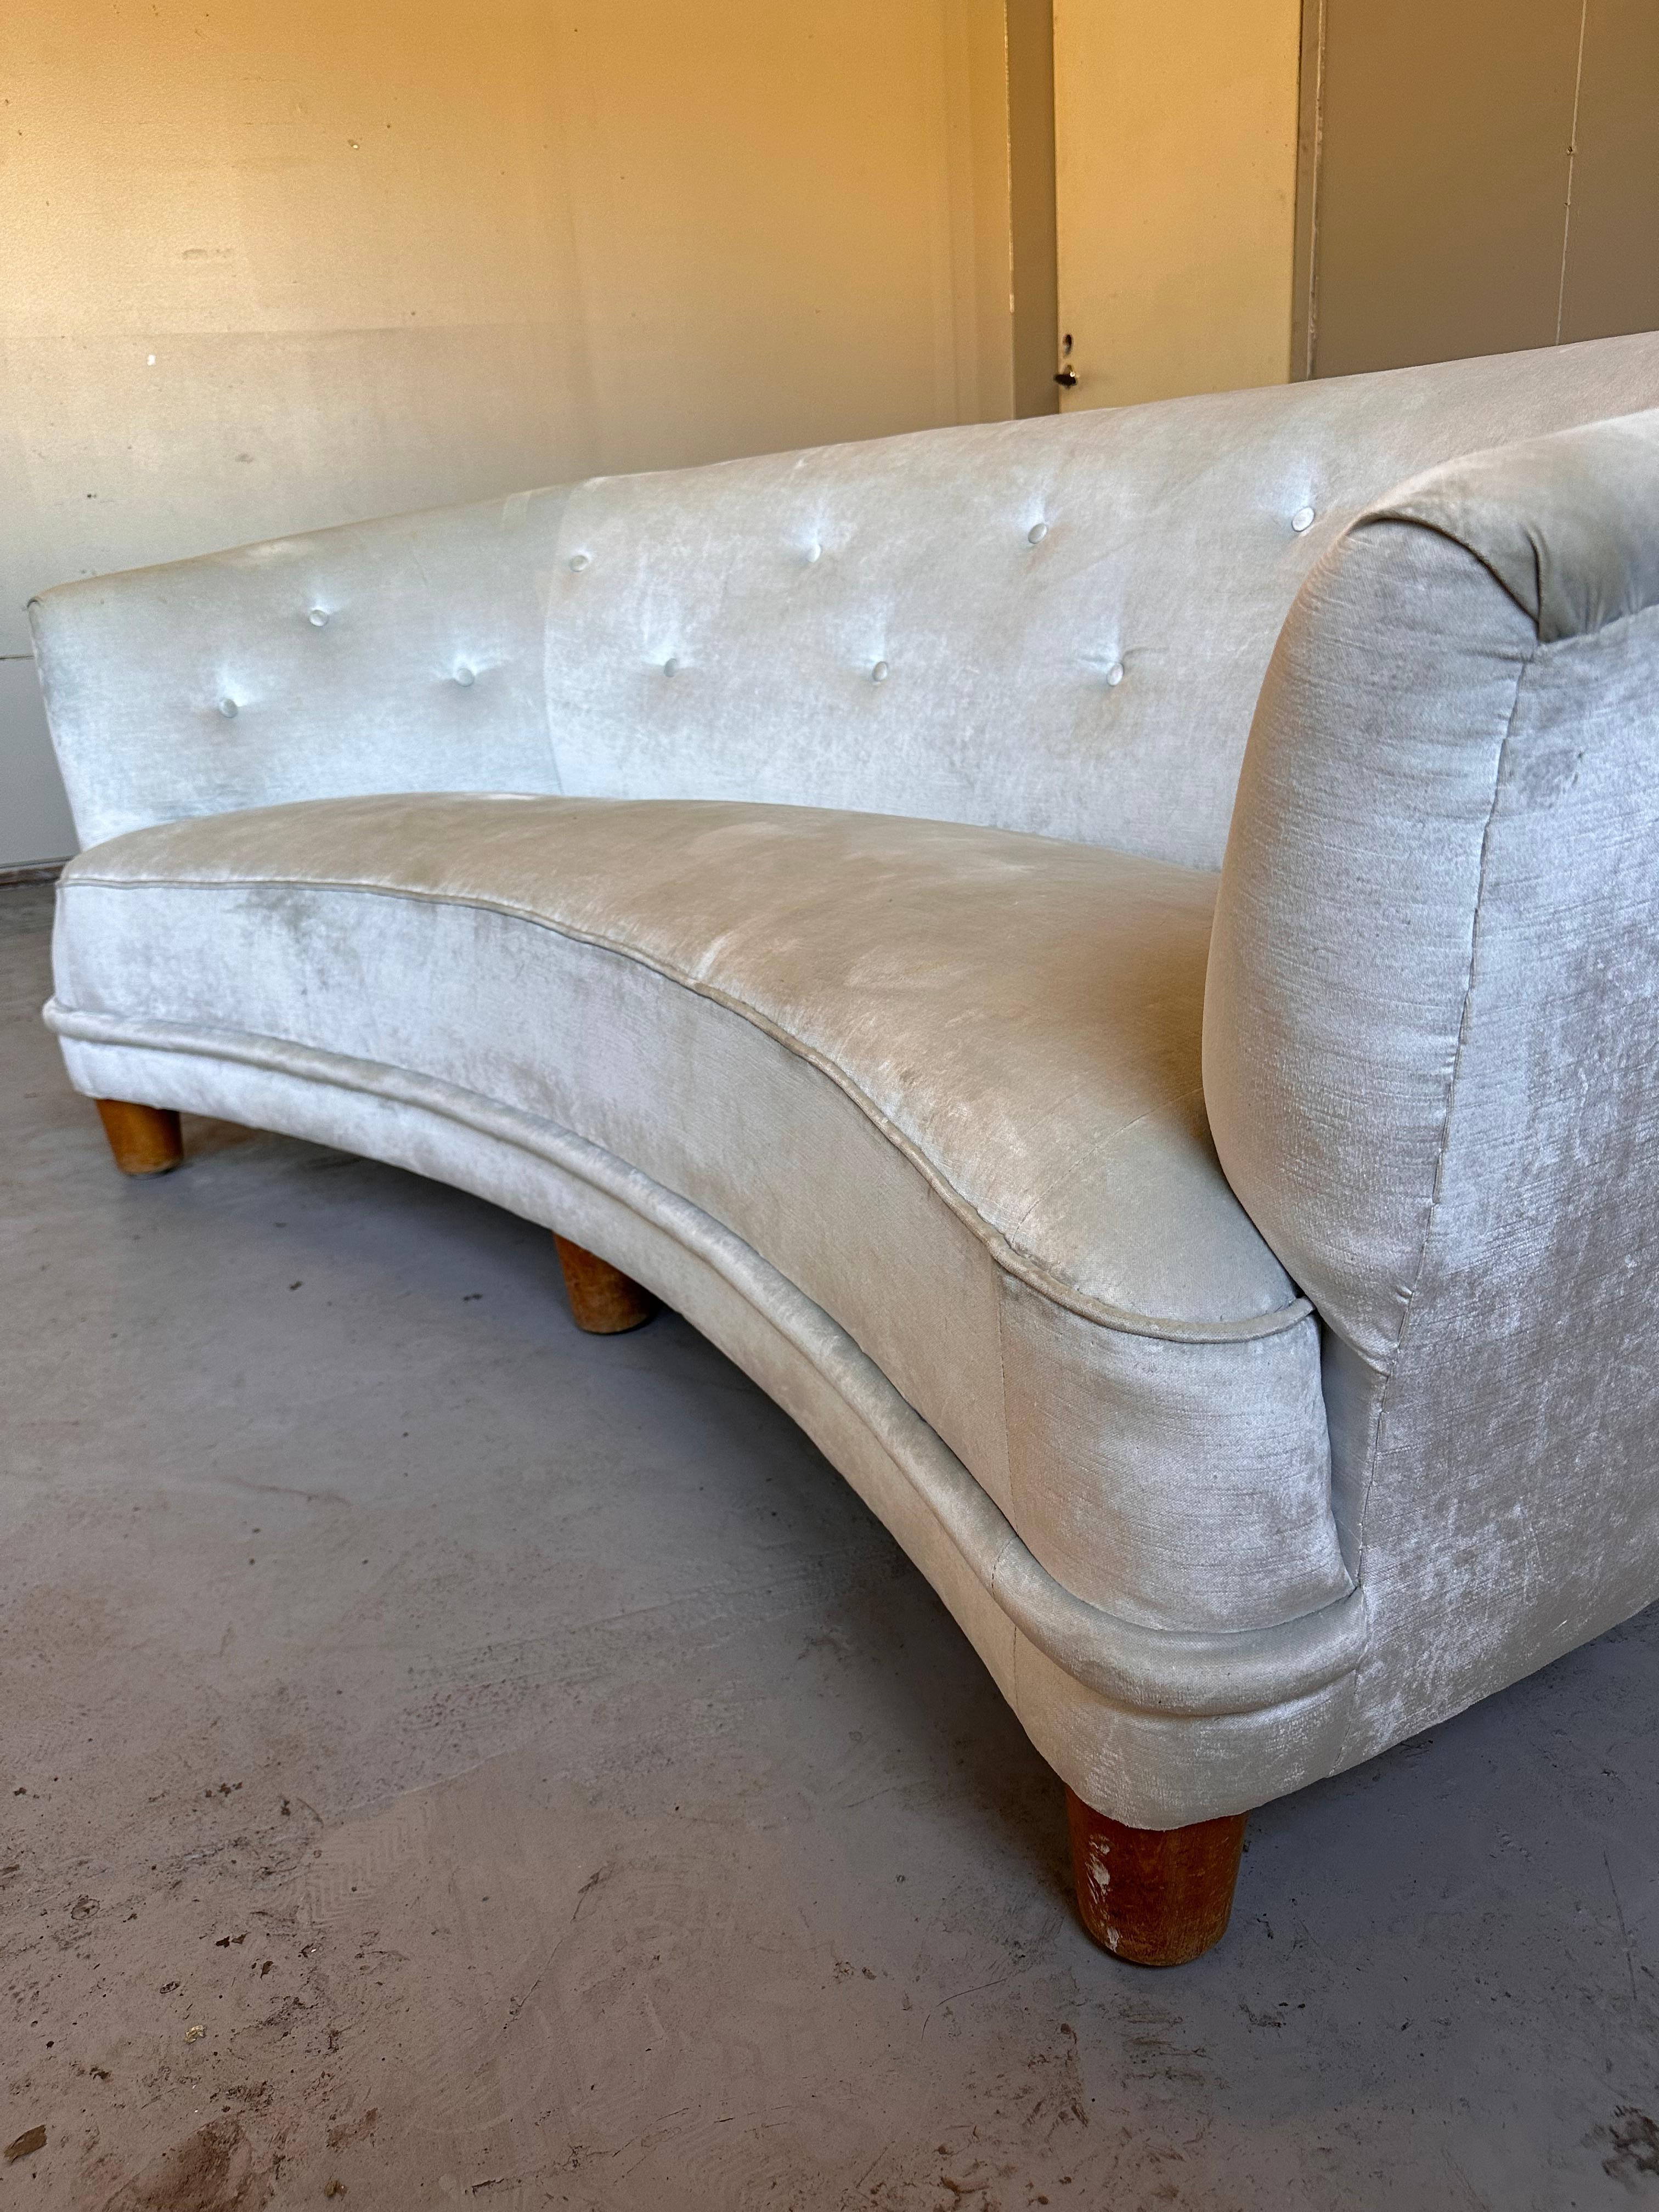 50s style couch